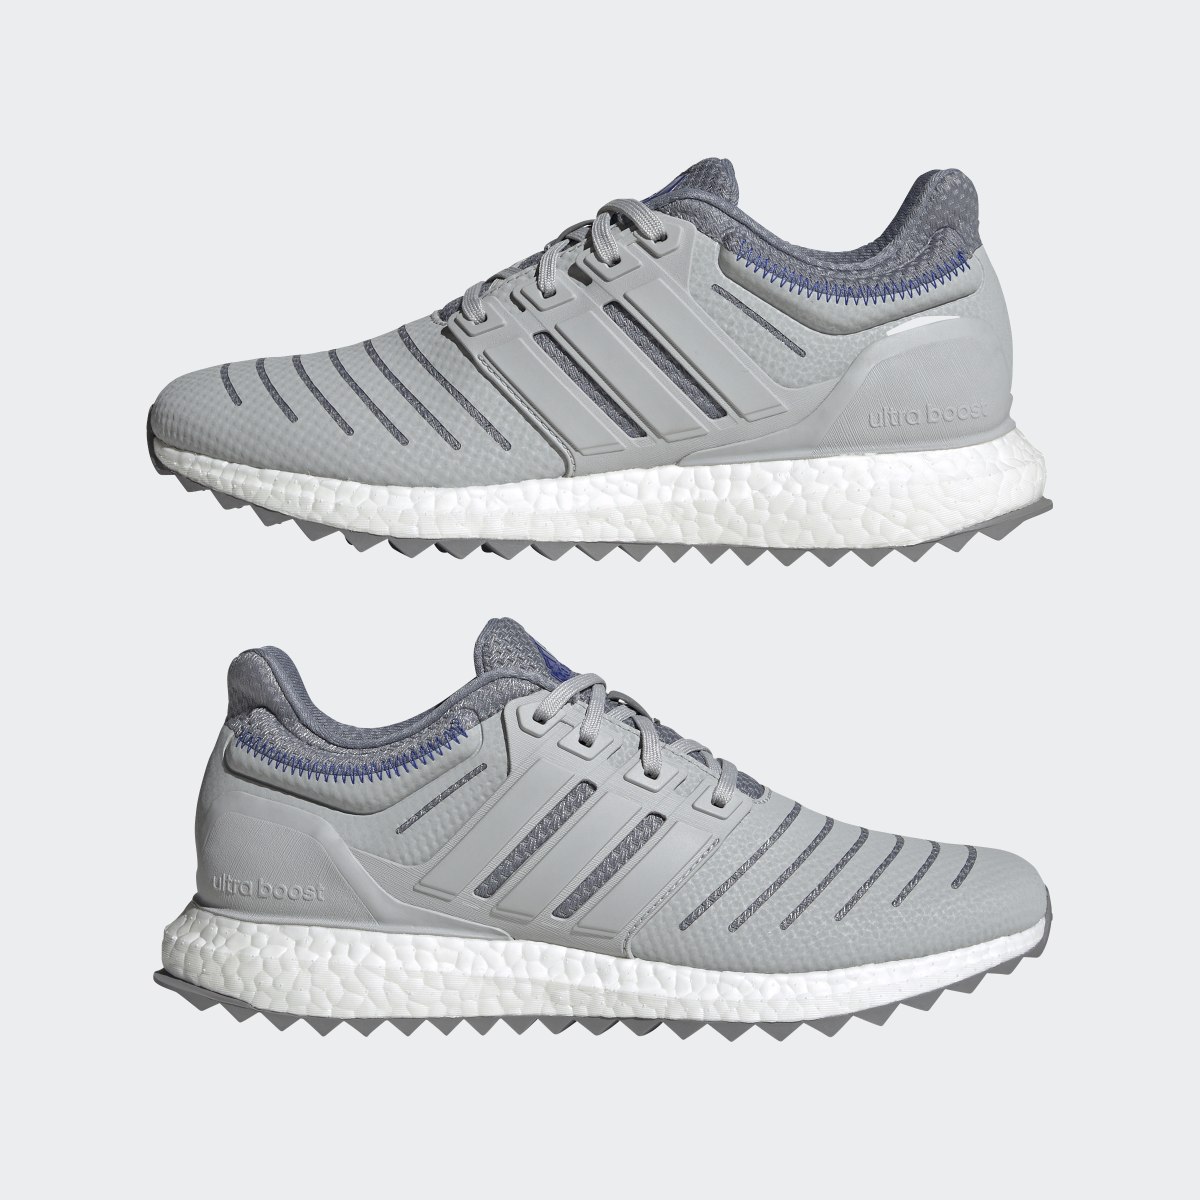 Adidas Ultraboost DNA XXII Lifestyle Running Sportswear Capsule Collection Shoes. 8